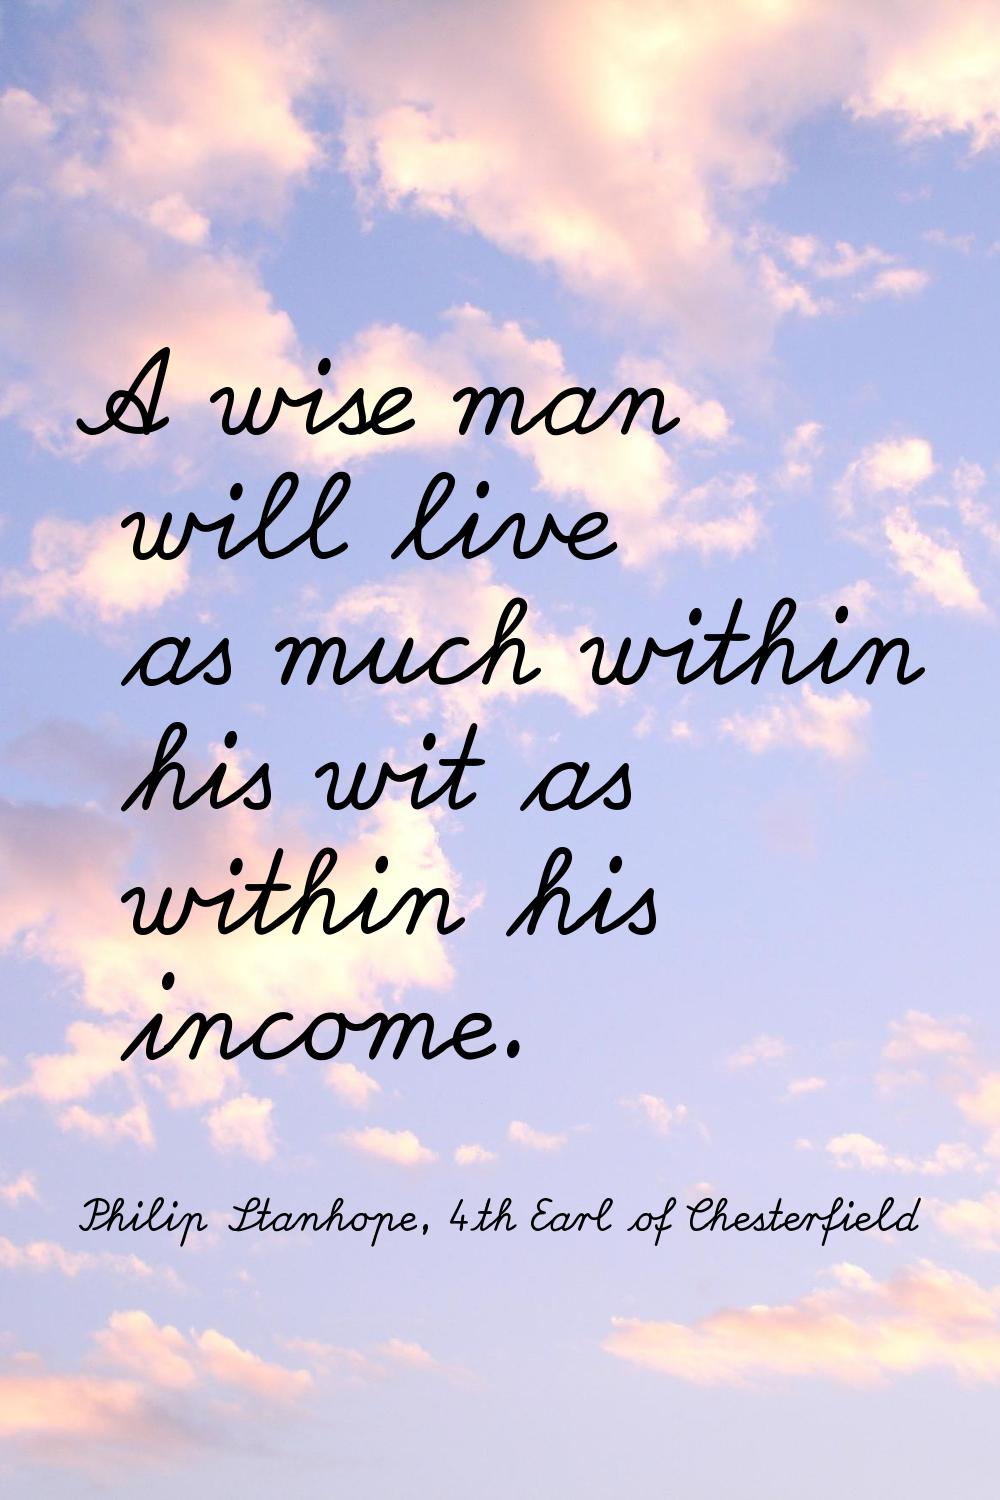 A wise man will live as much within his wit as within his income.